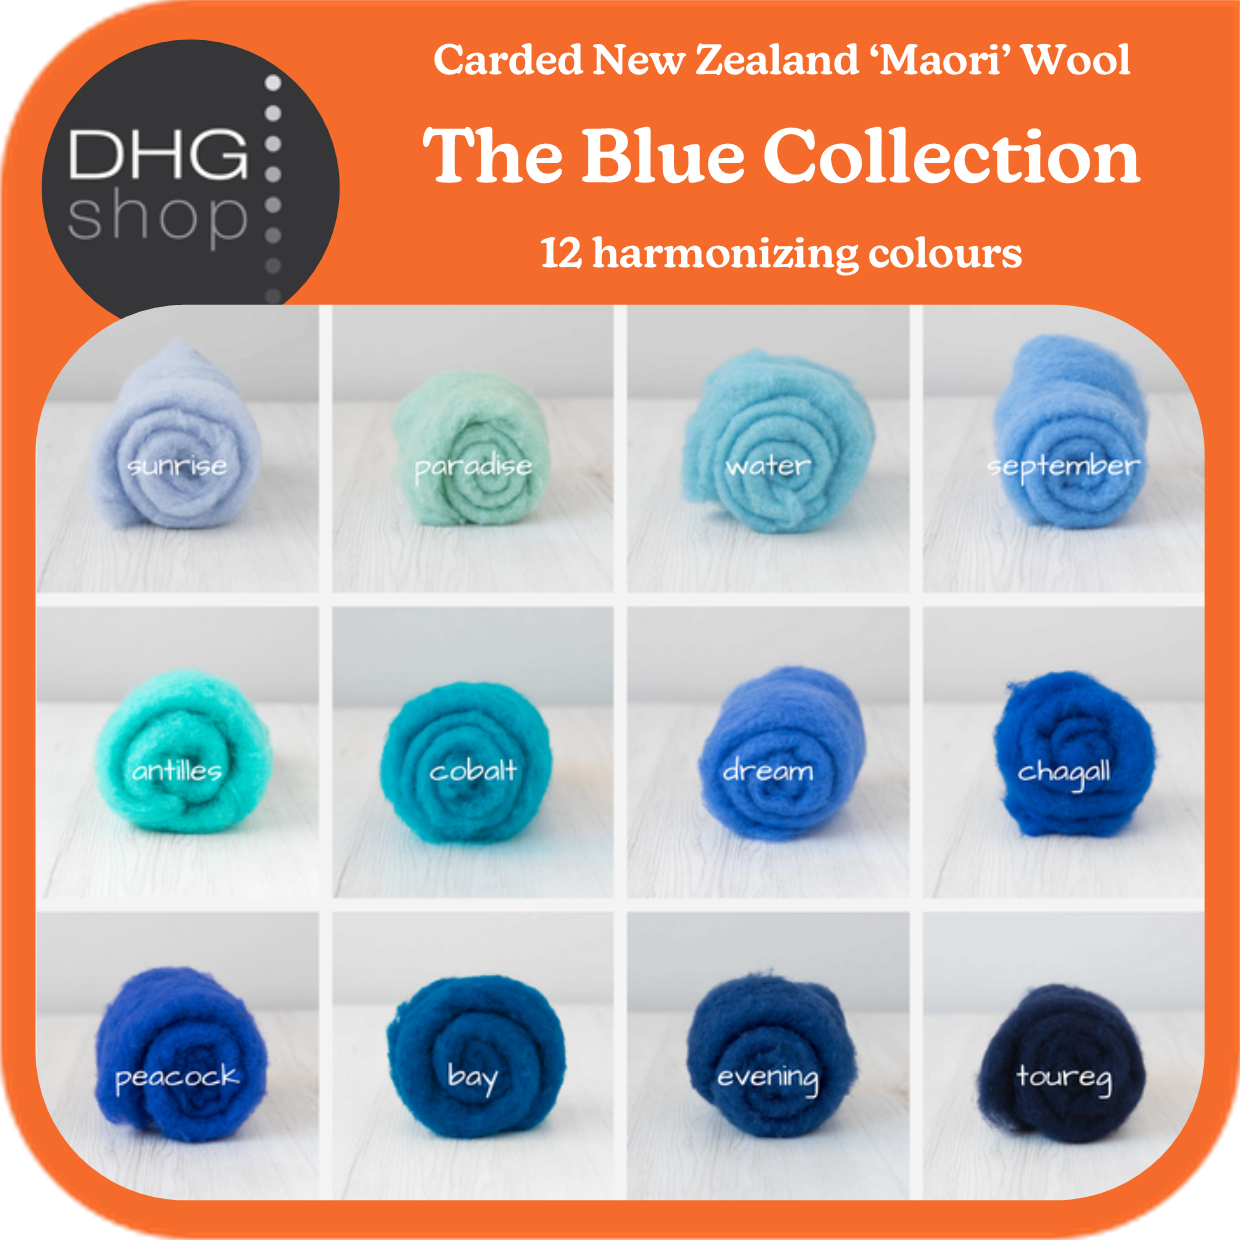 The Blue Collection - Carded New Zealand Wool DHG 'Maori' Batts